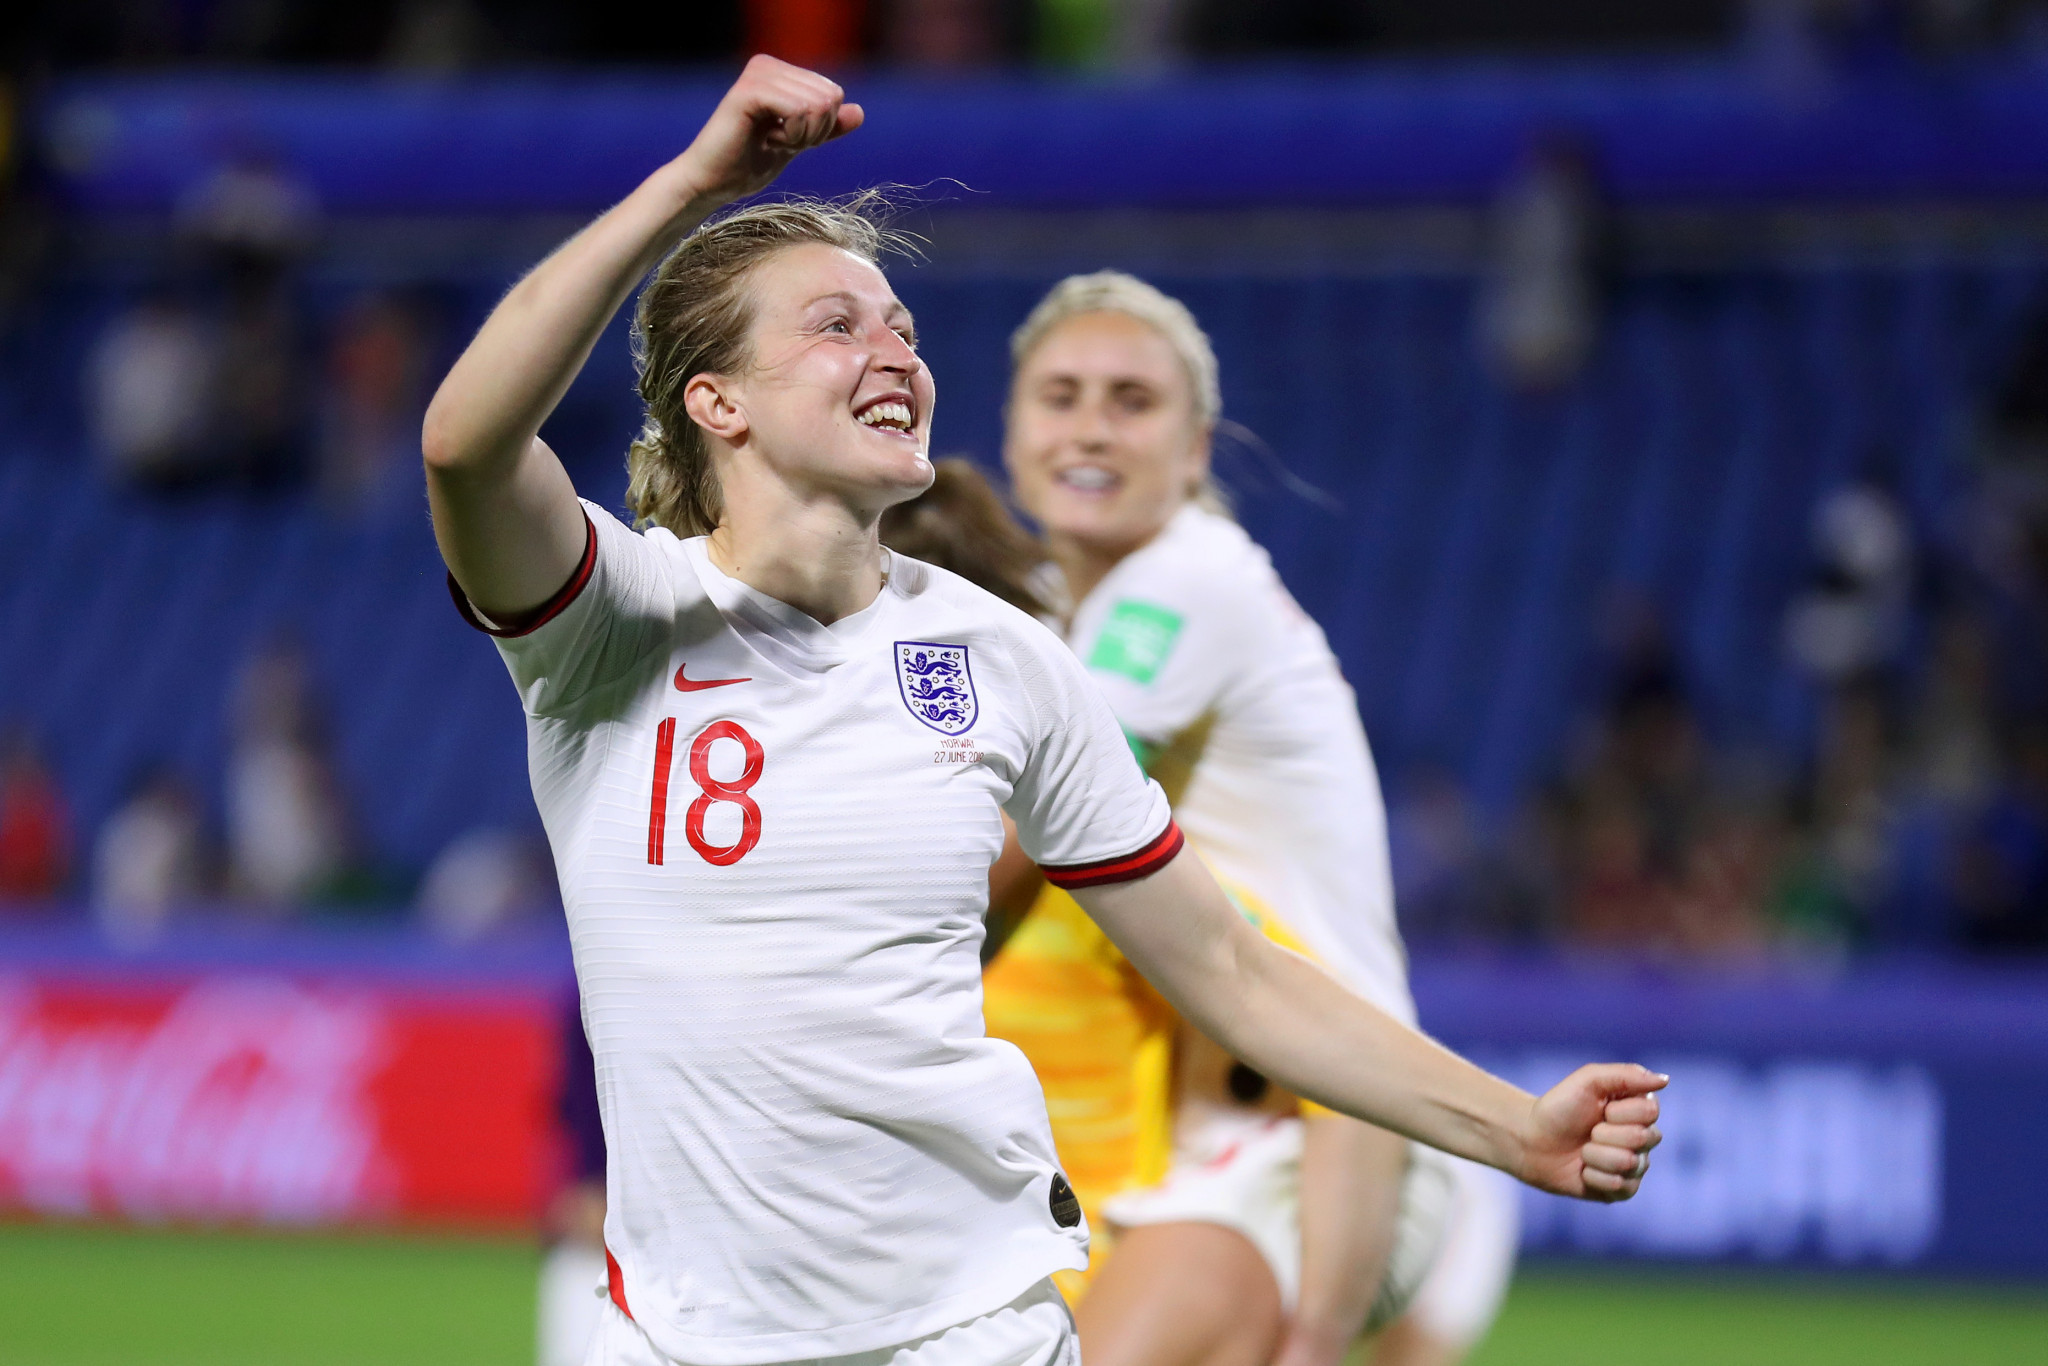 Ellen White scored her fifth goal of the tournament as England reached the semi-finals ©Getty Images